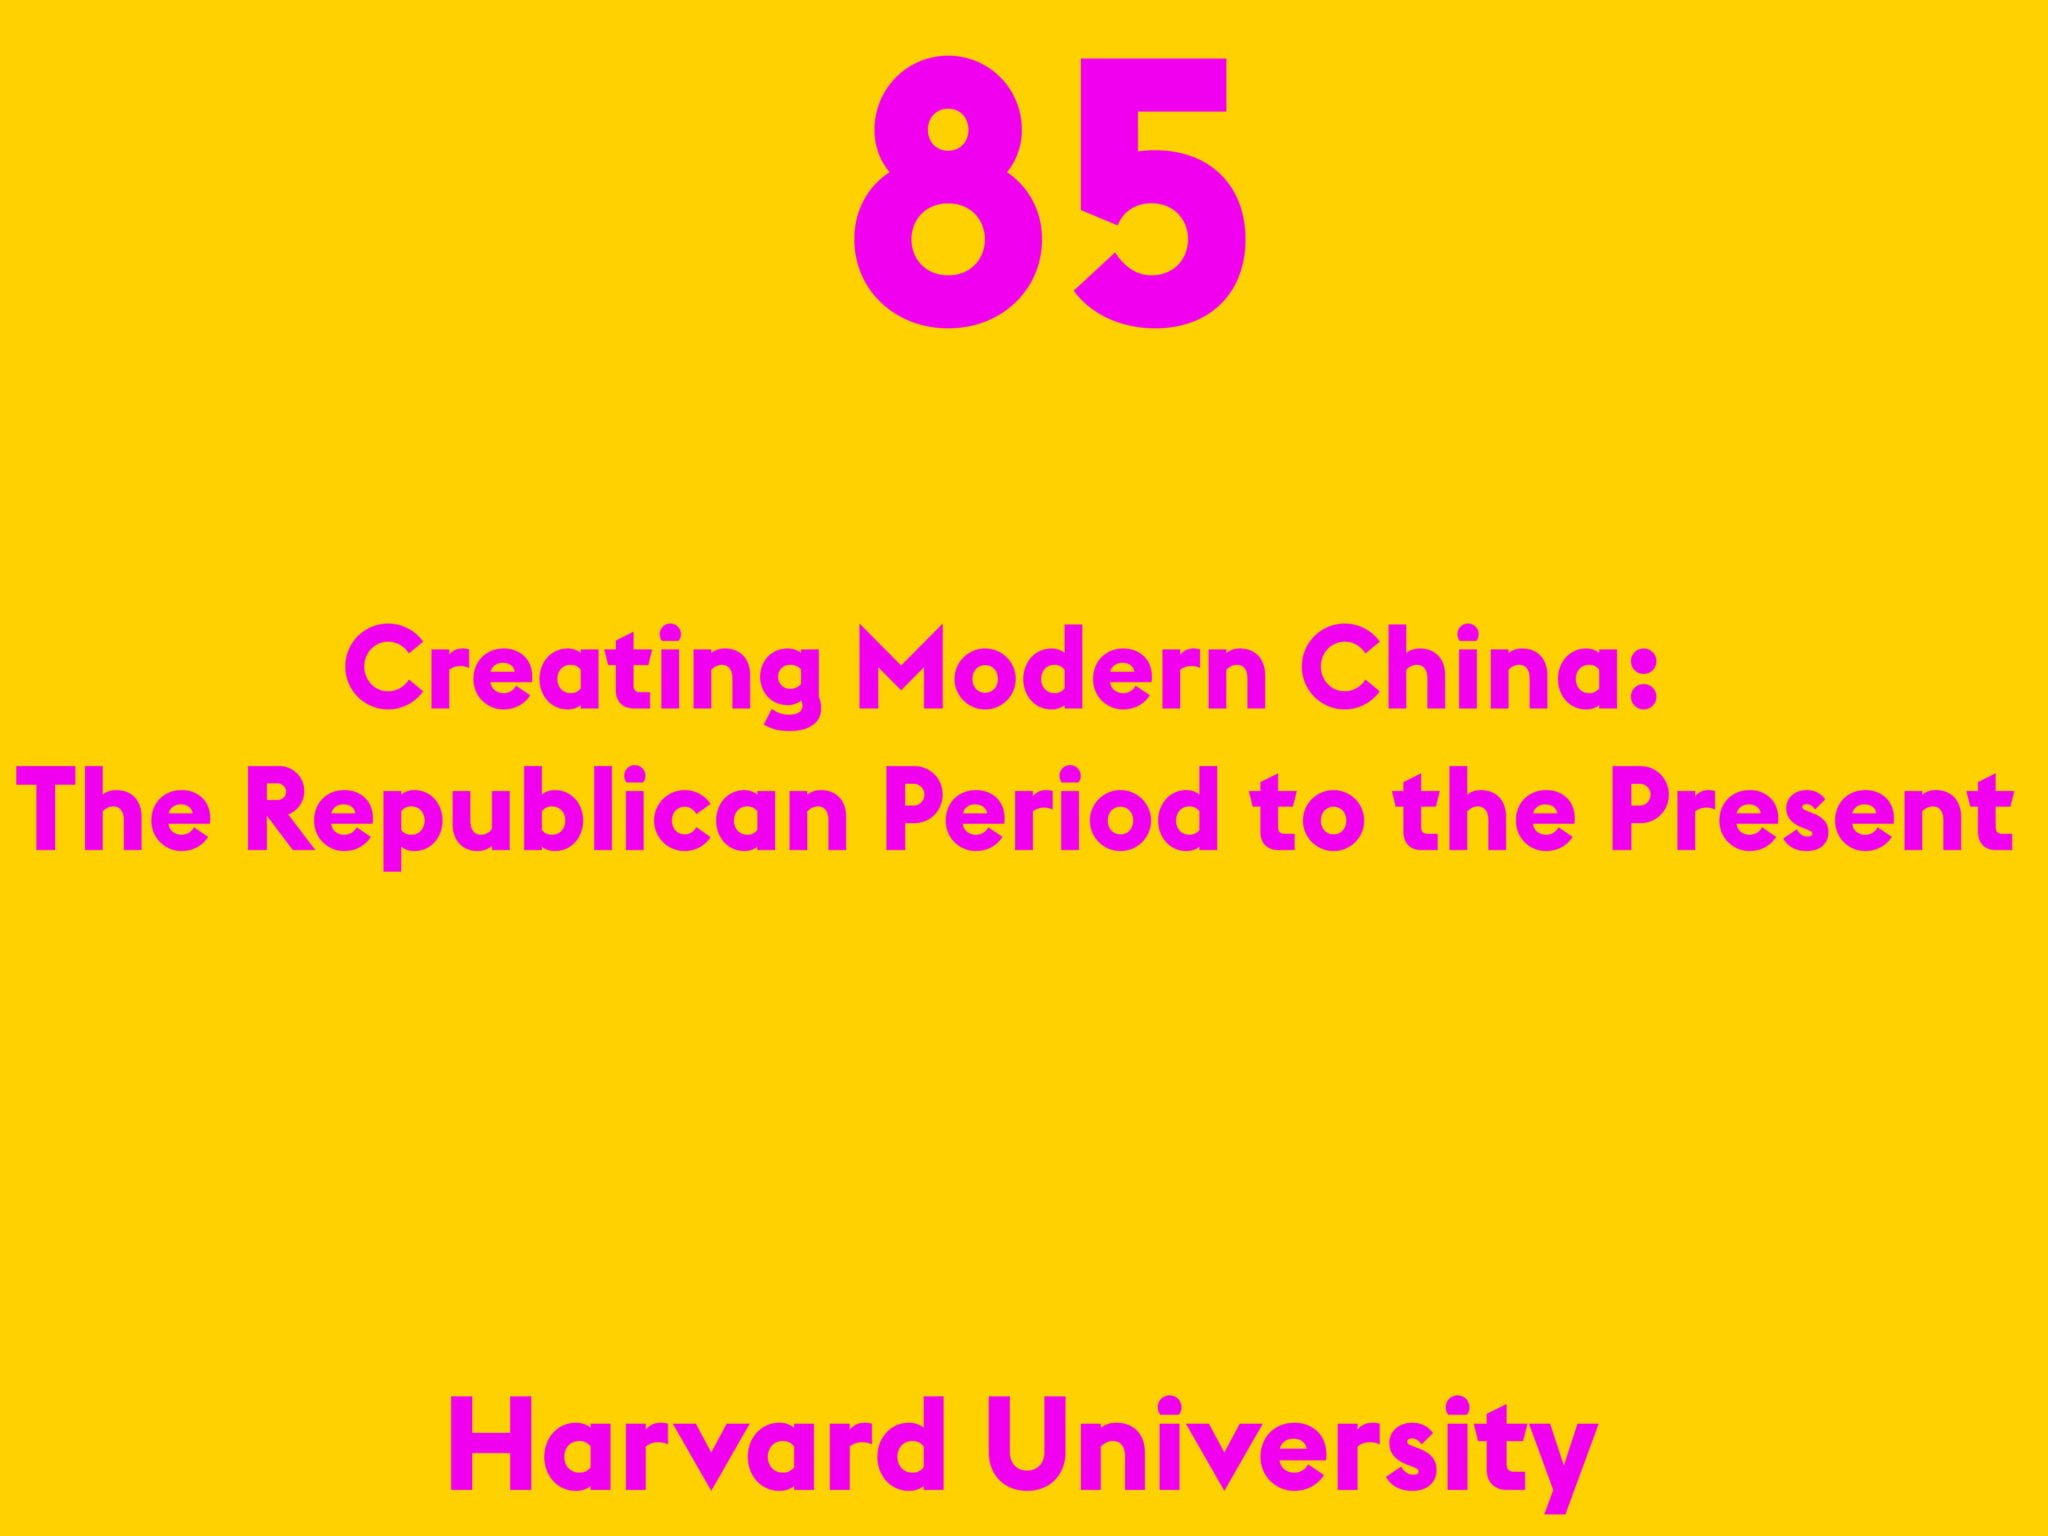 Creating Modern China: The Republican Period to the Present